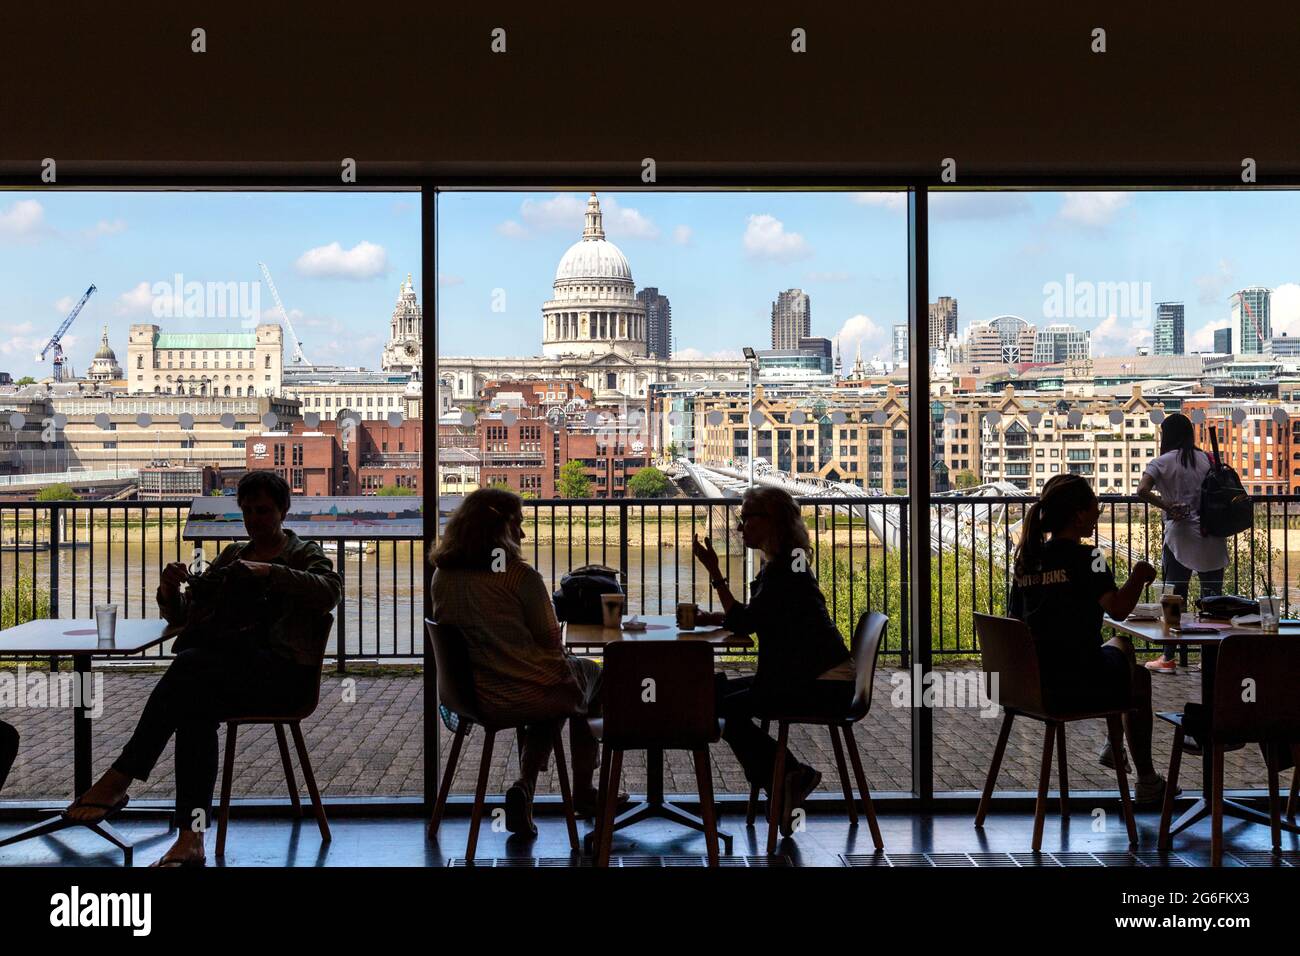 Silhouettes of people at the cafe overlooking St Pauls, Thames river and Millannium Bridge in Tate Modern museum of contemporary art, London, UK Stock Photo